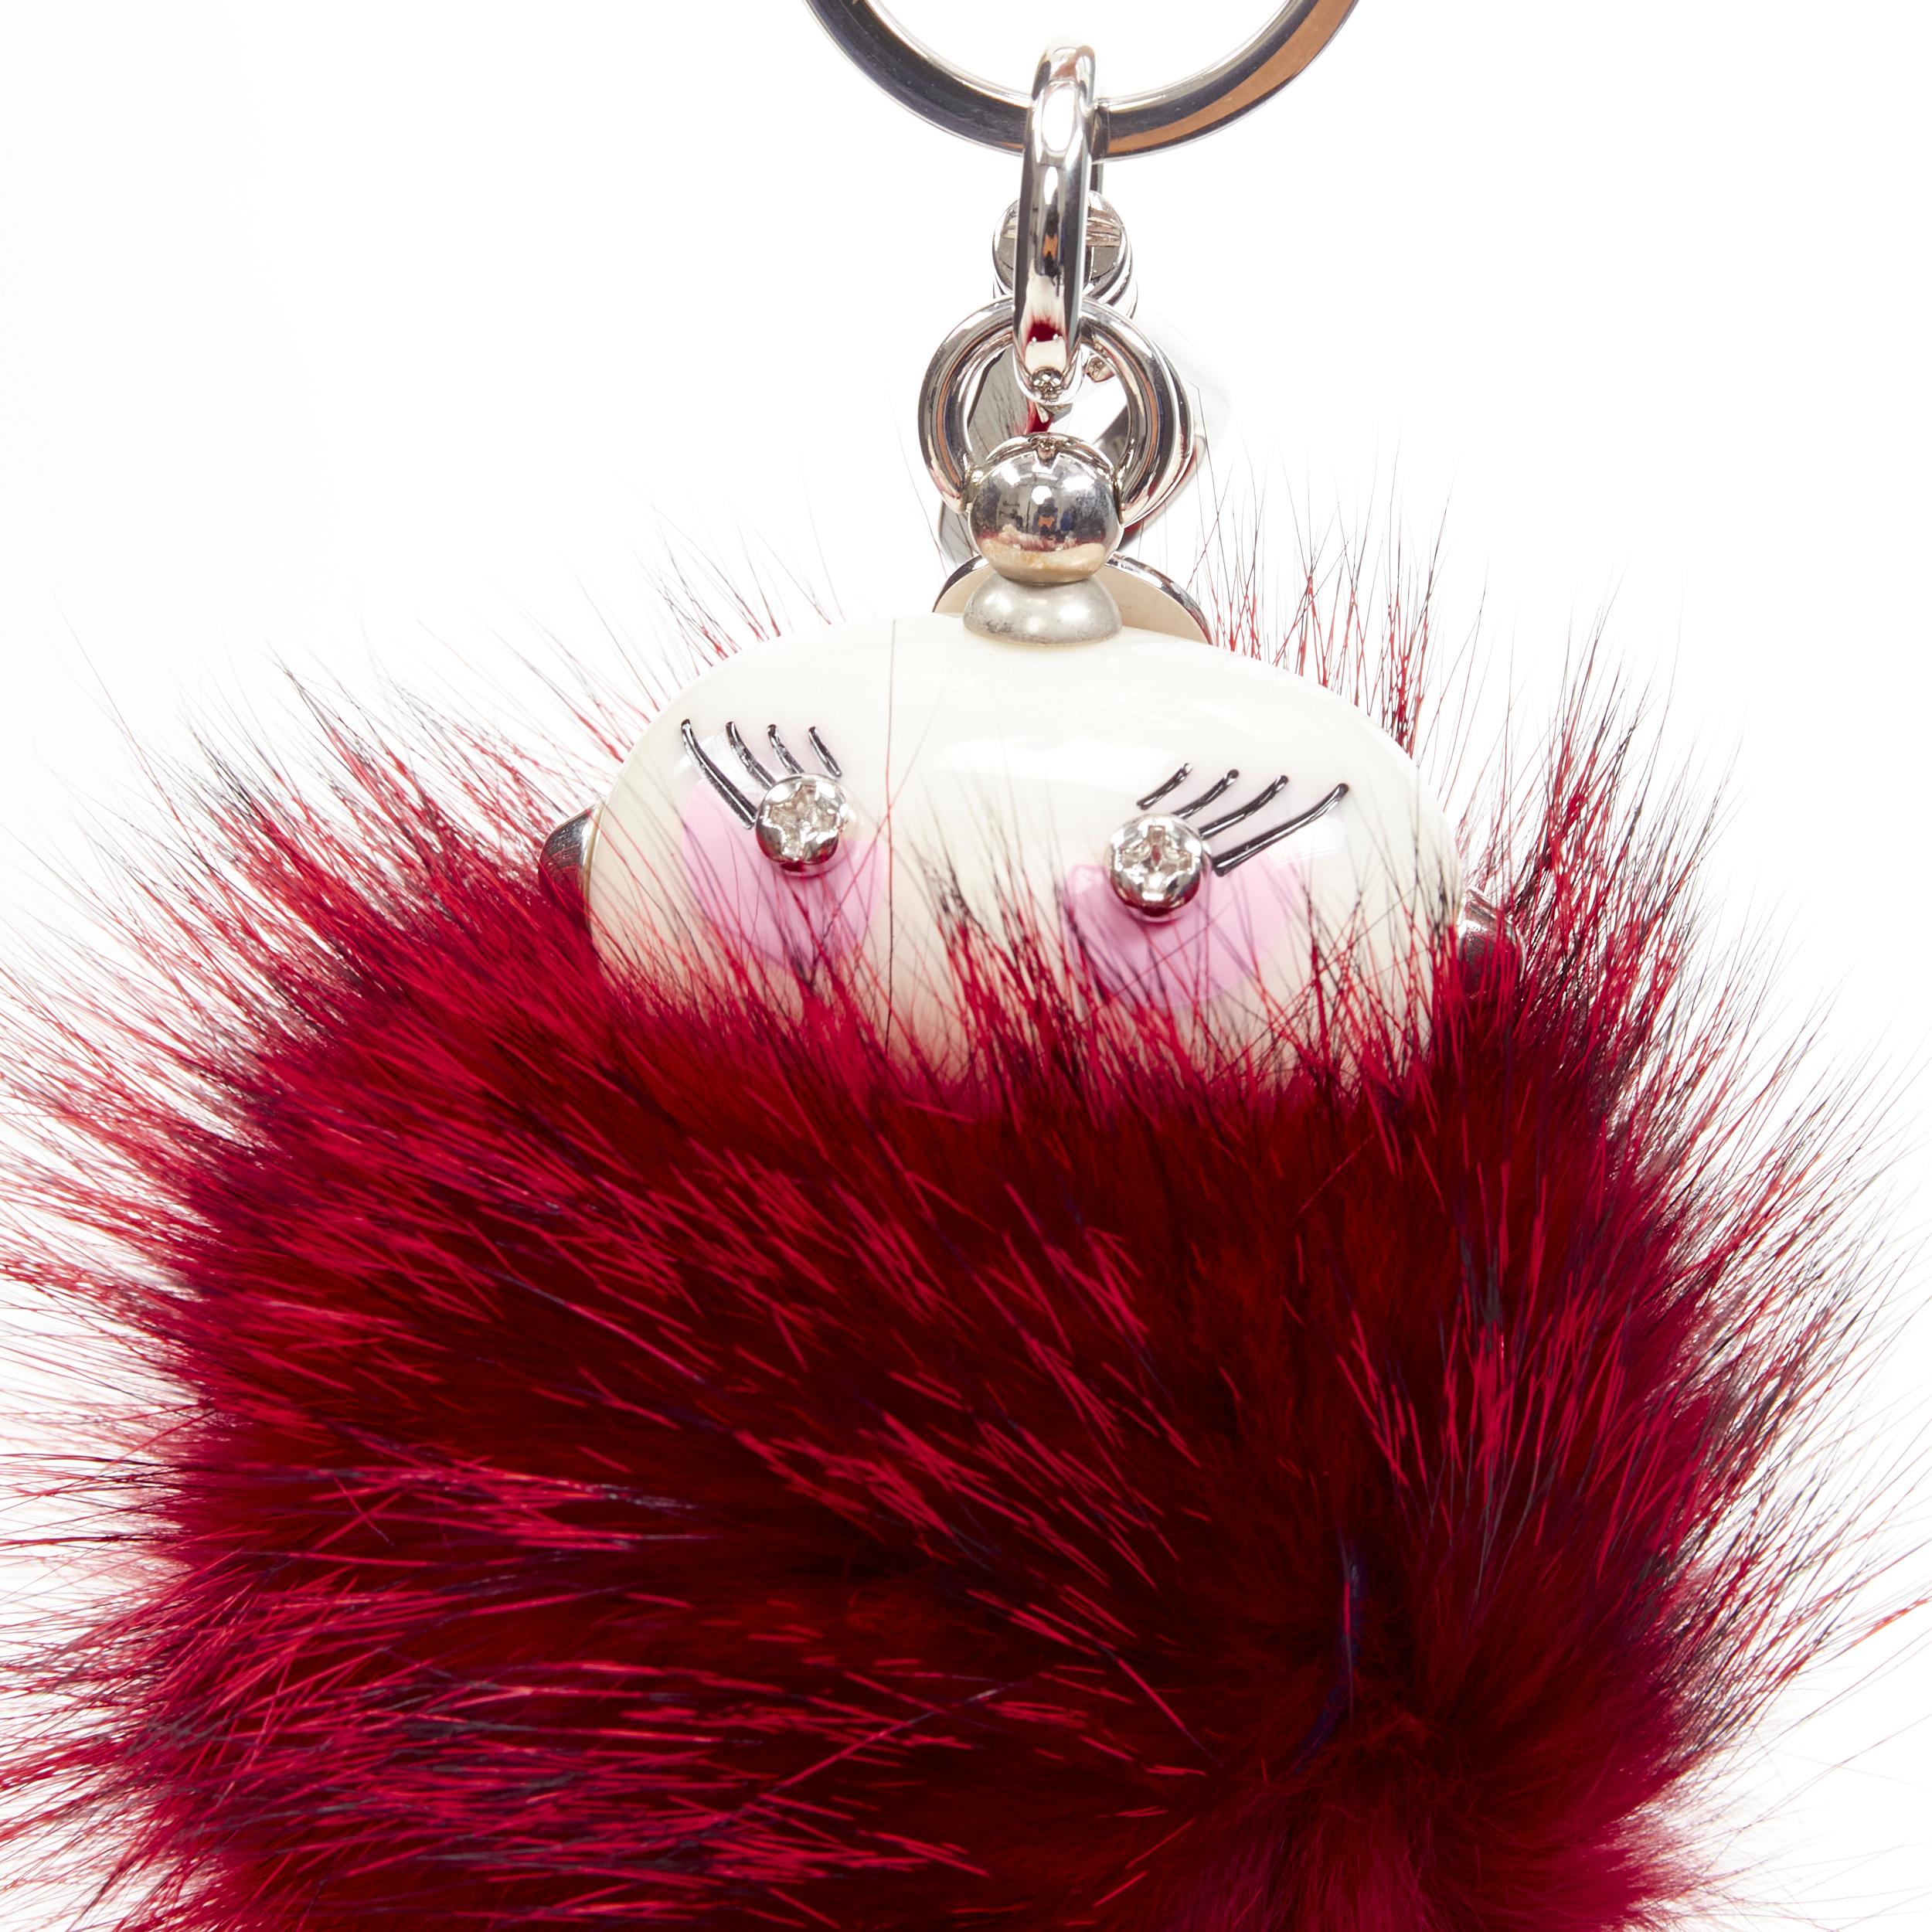 rare PRADA Robot red fur body mixed wire bolts keyring bag charm
Brand: Prada
Designer: Miuccia Prada
Collection: Robot 
Material: Mixed Materials
Color: Red
Pattern: Solid
Extra Detail: Silver-tone hardware. Oval head with screw embellished eyes.